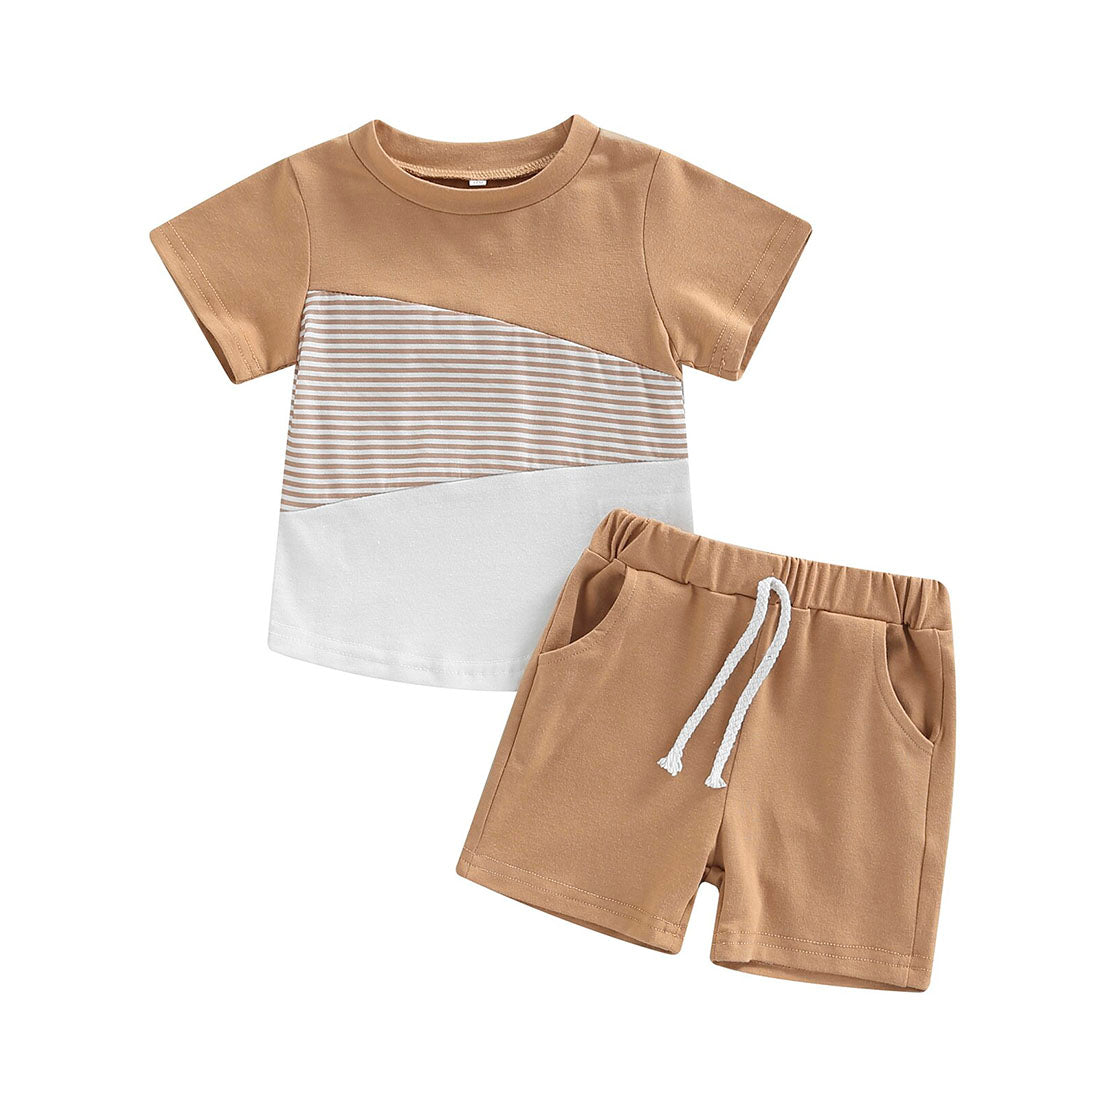 Toddler Boy Clothes: Cute & Stylish Outfits